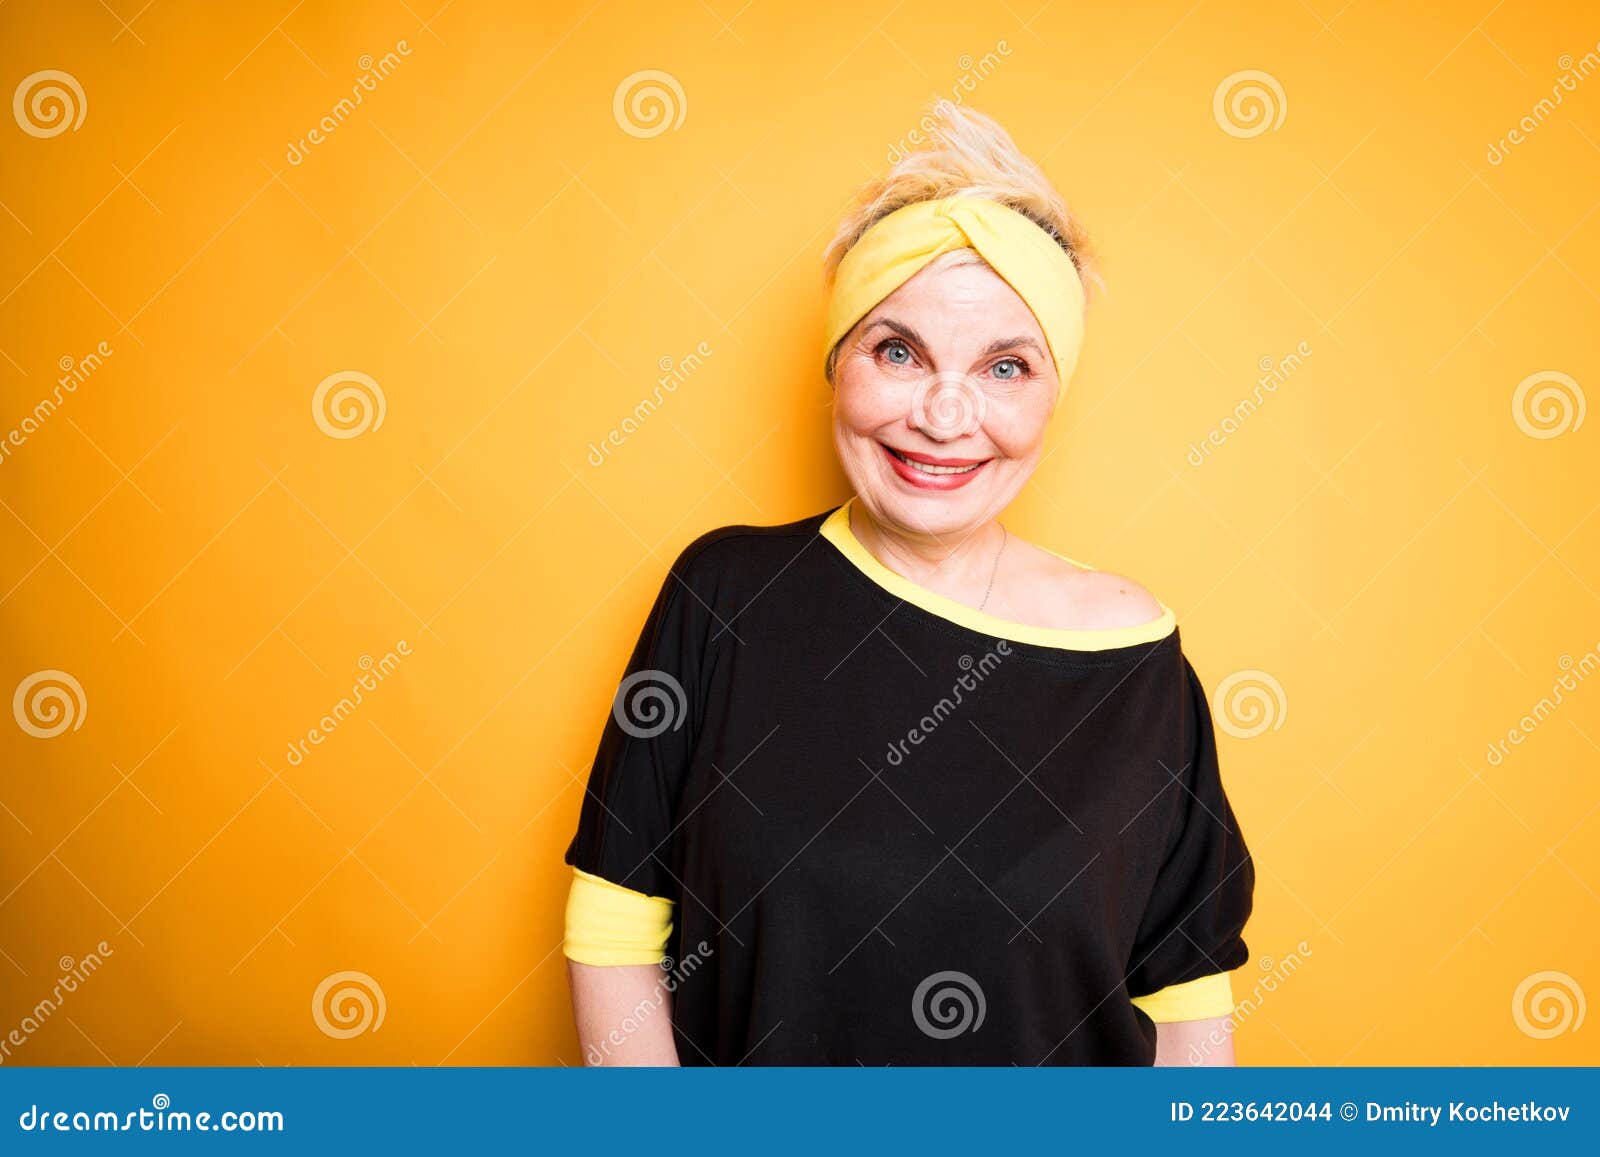 beautiful elderly woman in a sports bandage on her head and in a black t-shirt smiling and getting ready for a workout